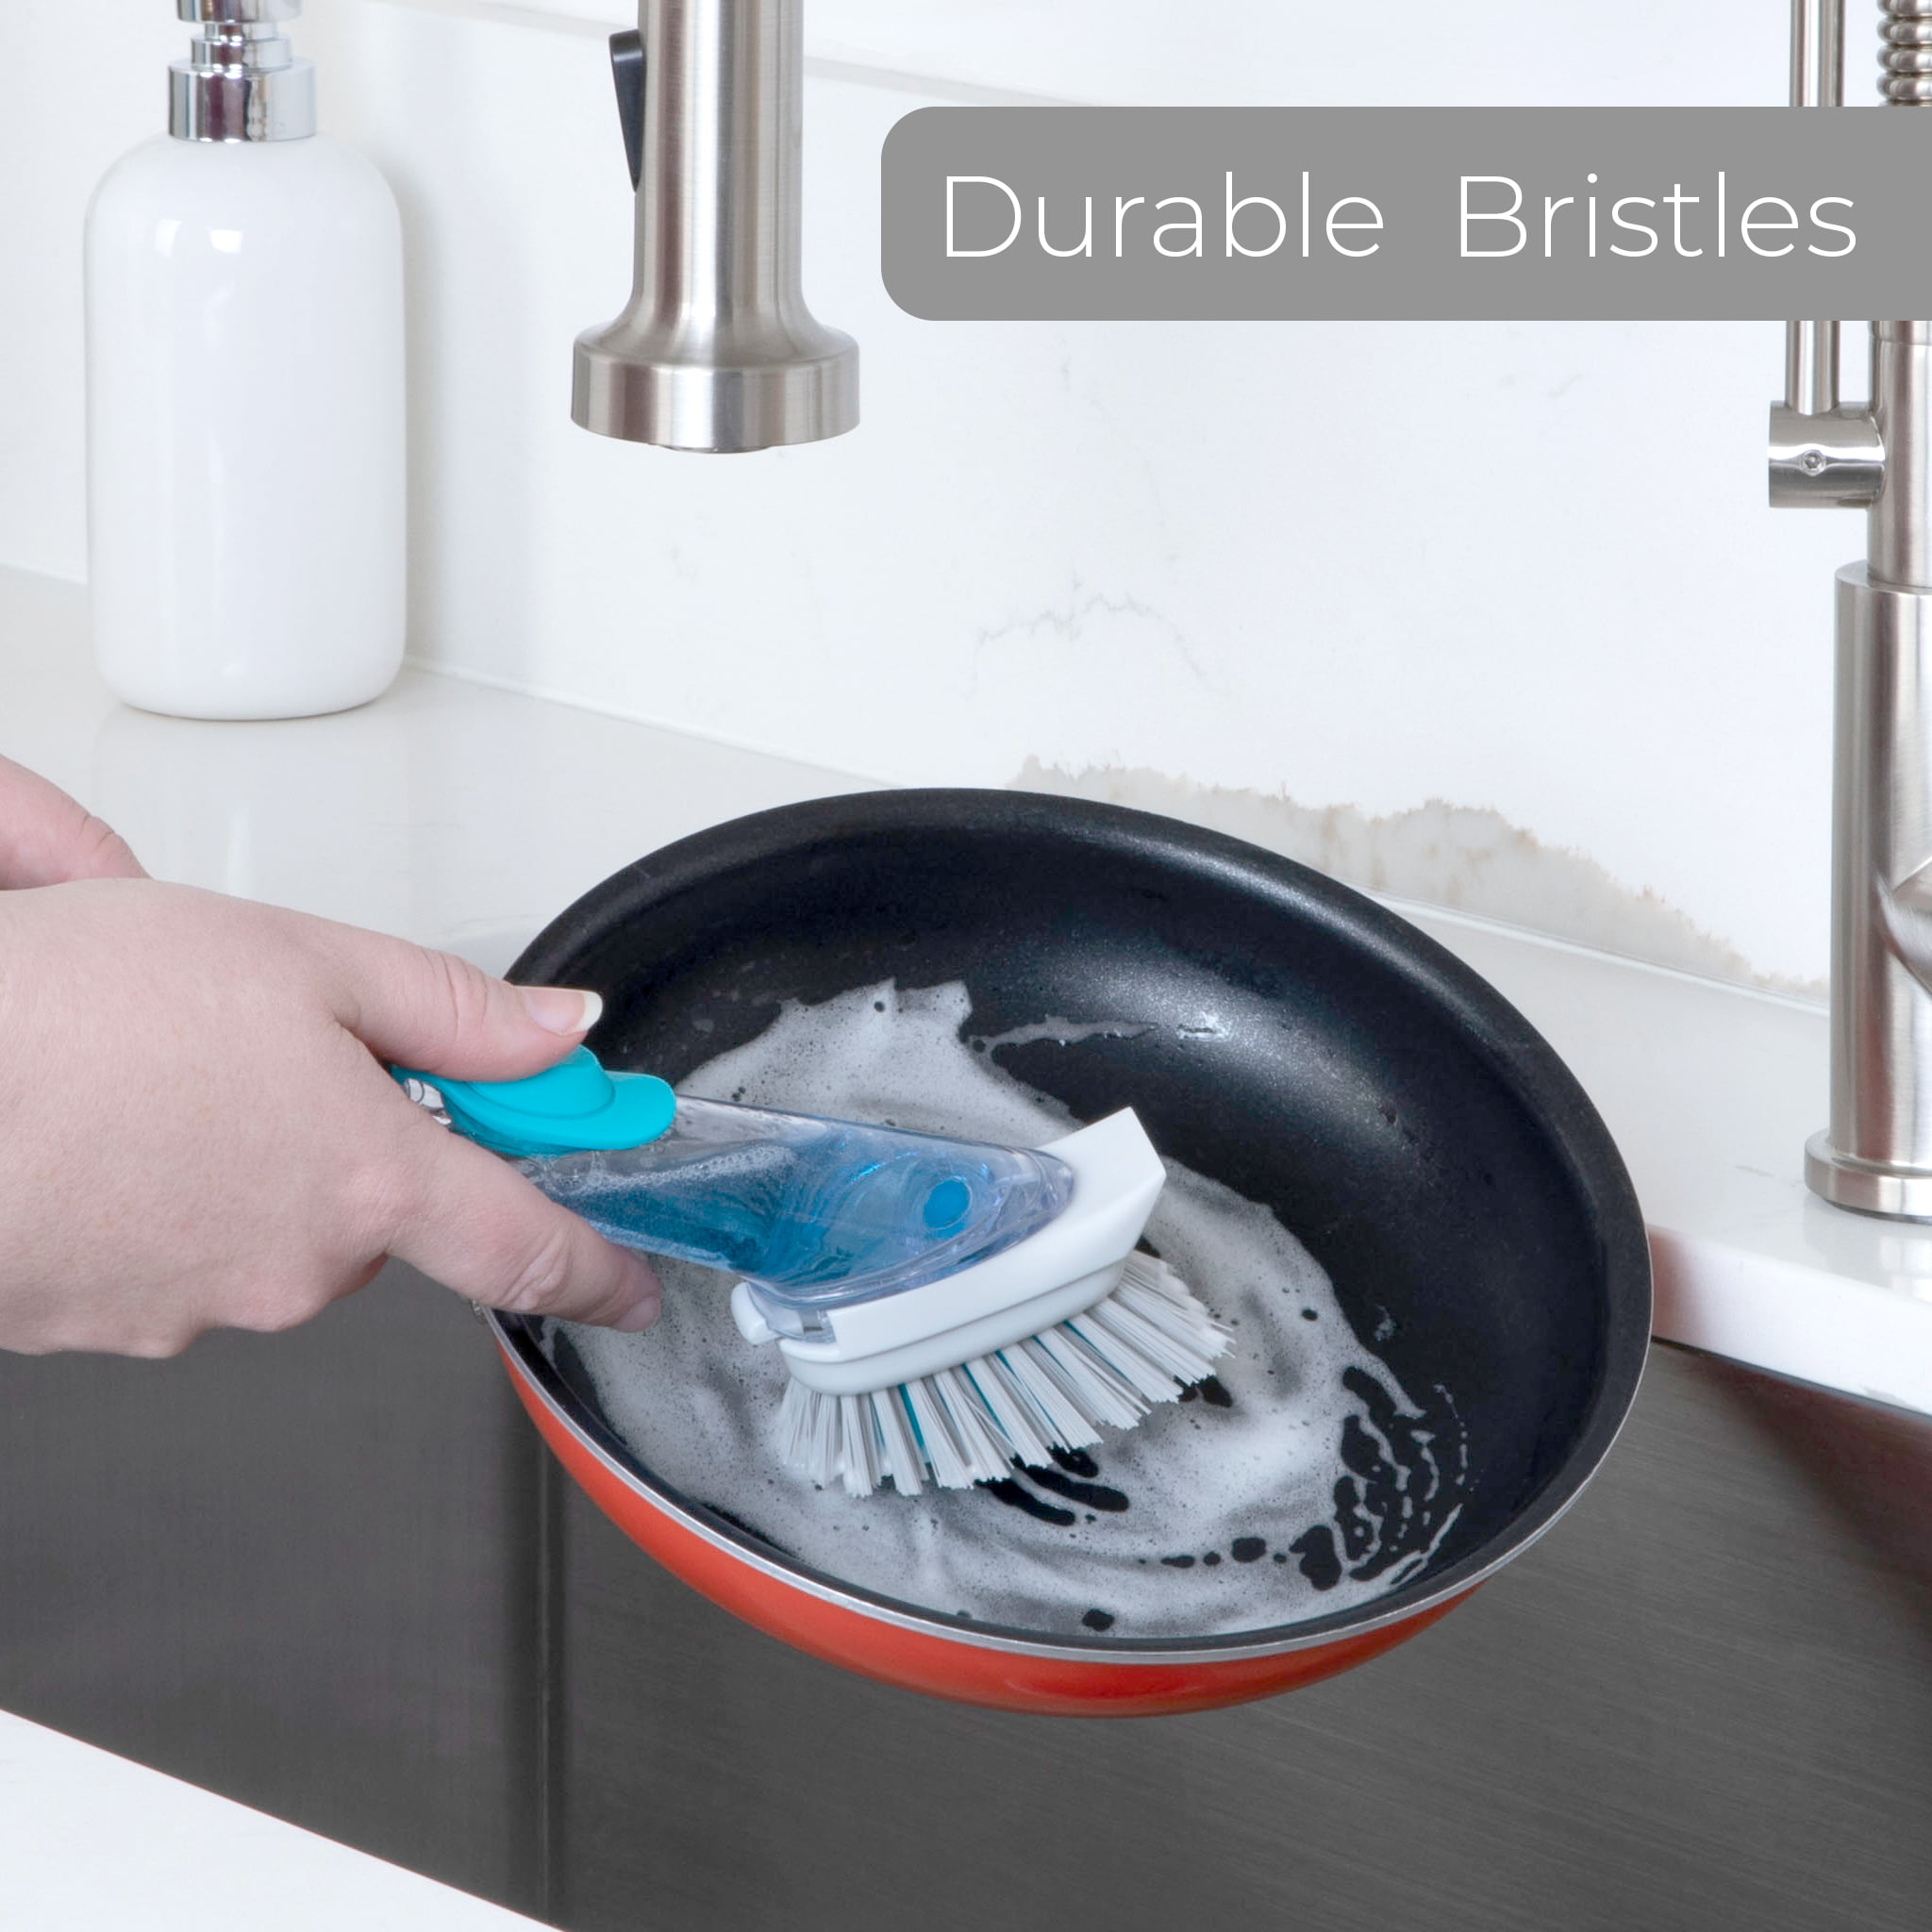 Smart Design All-Purpose Scrub Brush - Contoured Easy Grip Non-Slip Handle  - Tough Bristles - Odor Resistant - Dishwasher Safe - Cleaning Pots, Pans,  Sink and Tub - Gray and Teal 